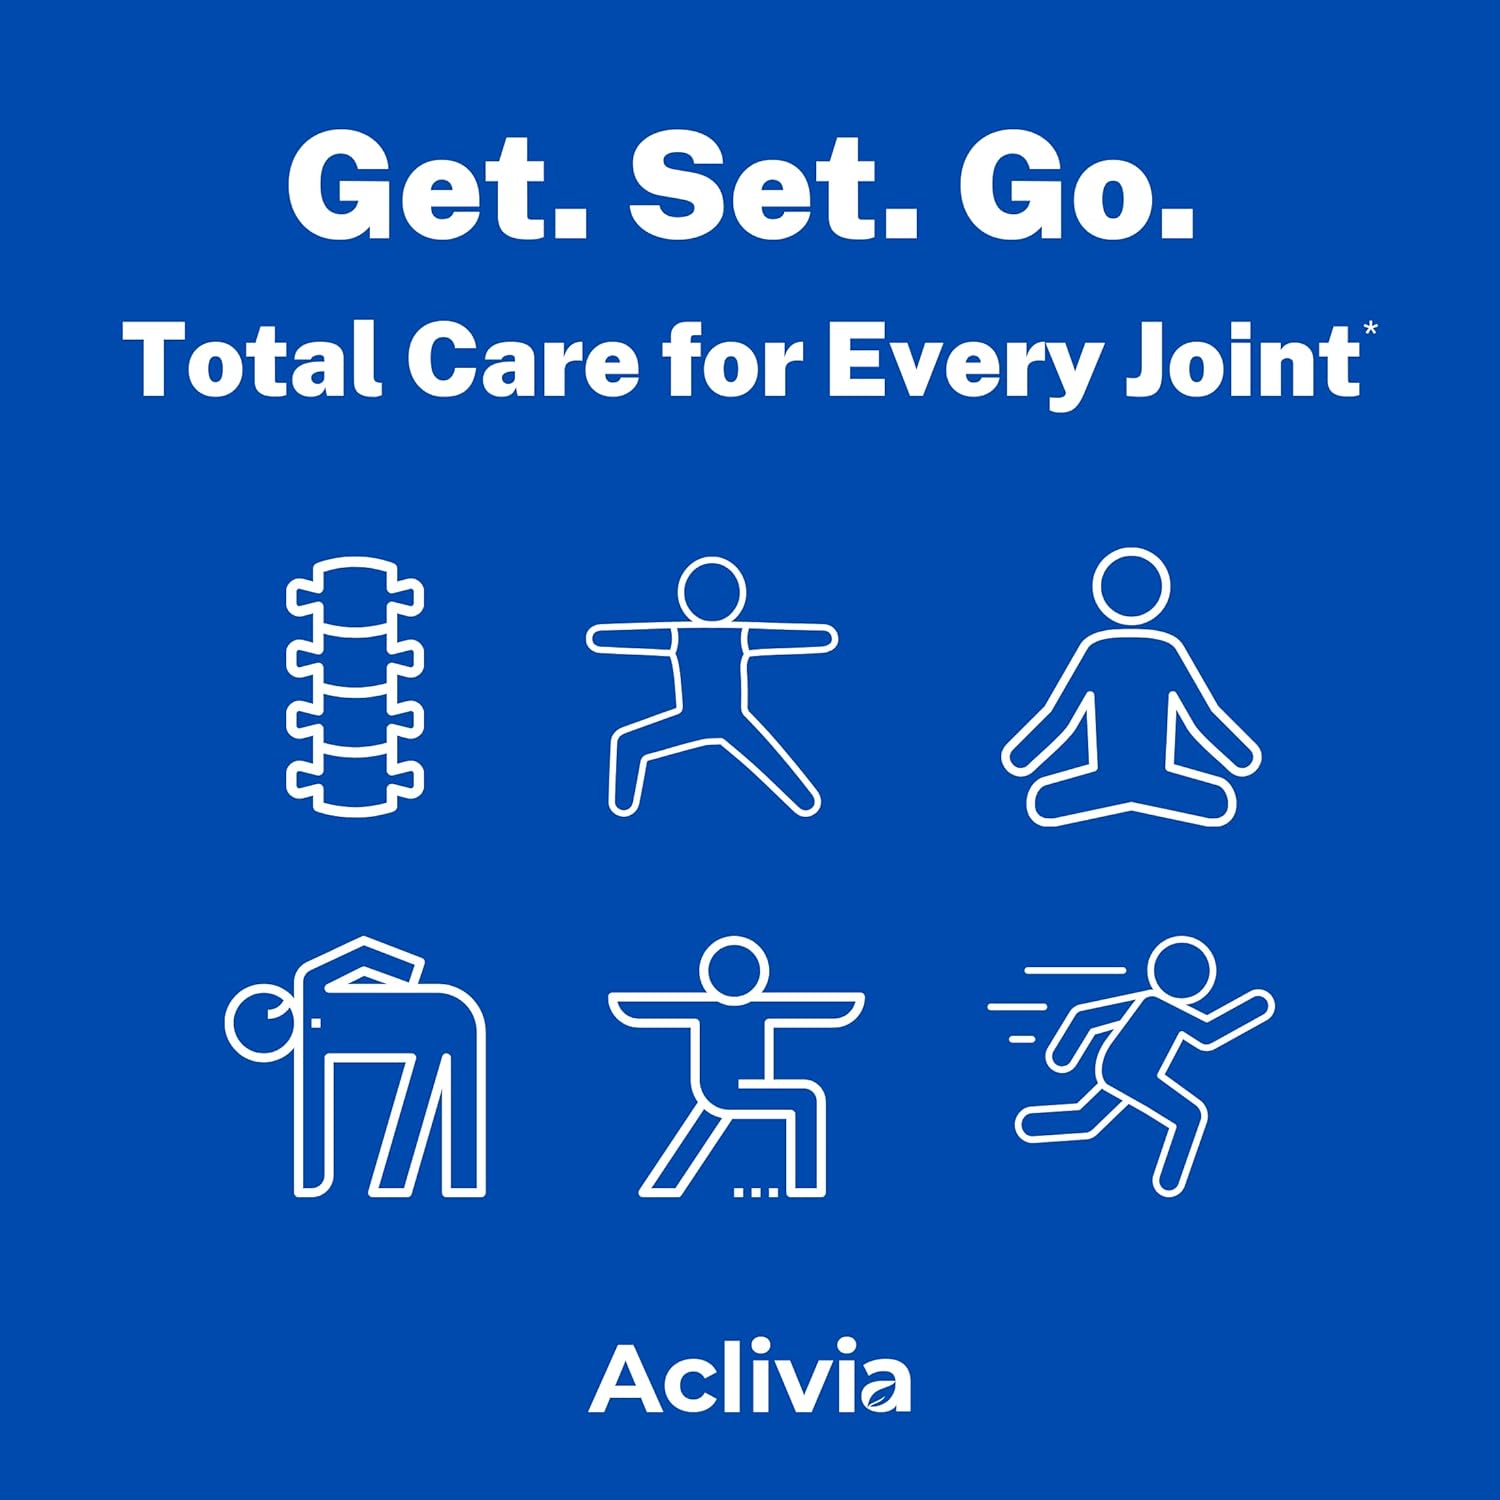 Aclivia Aclimove - Joint Support Supplement